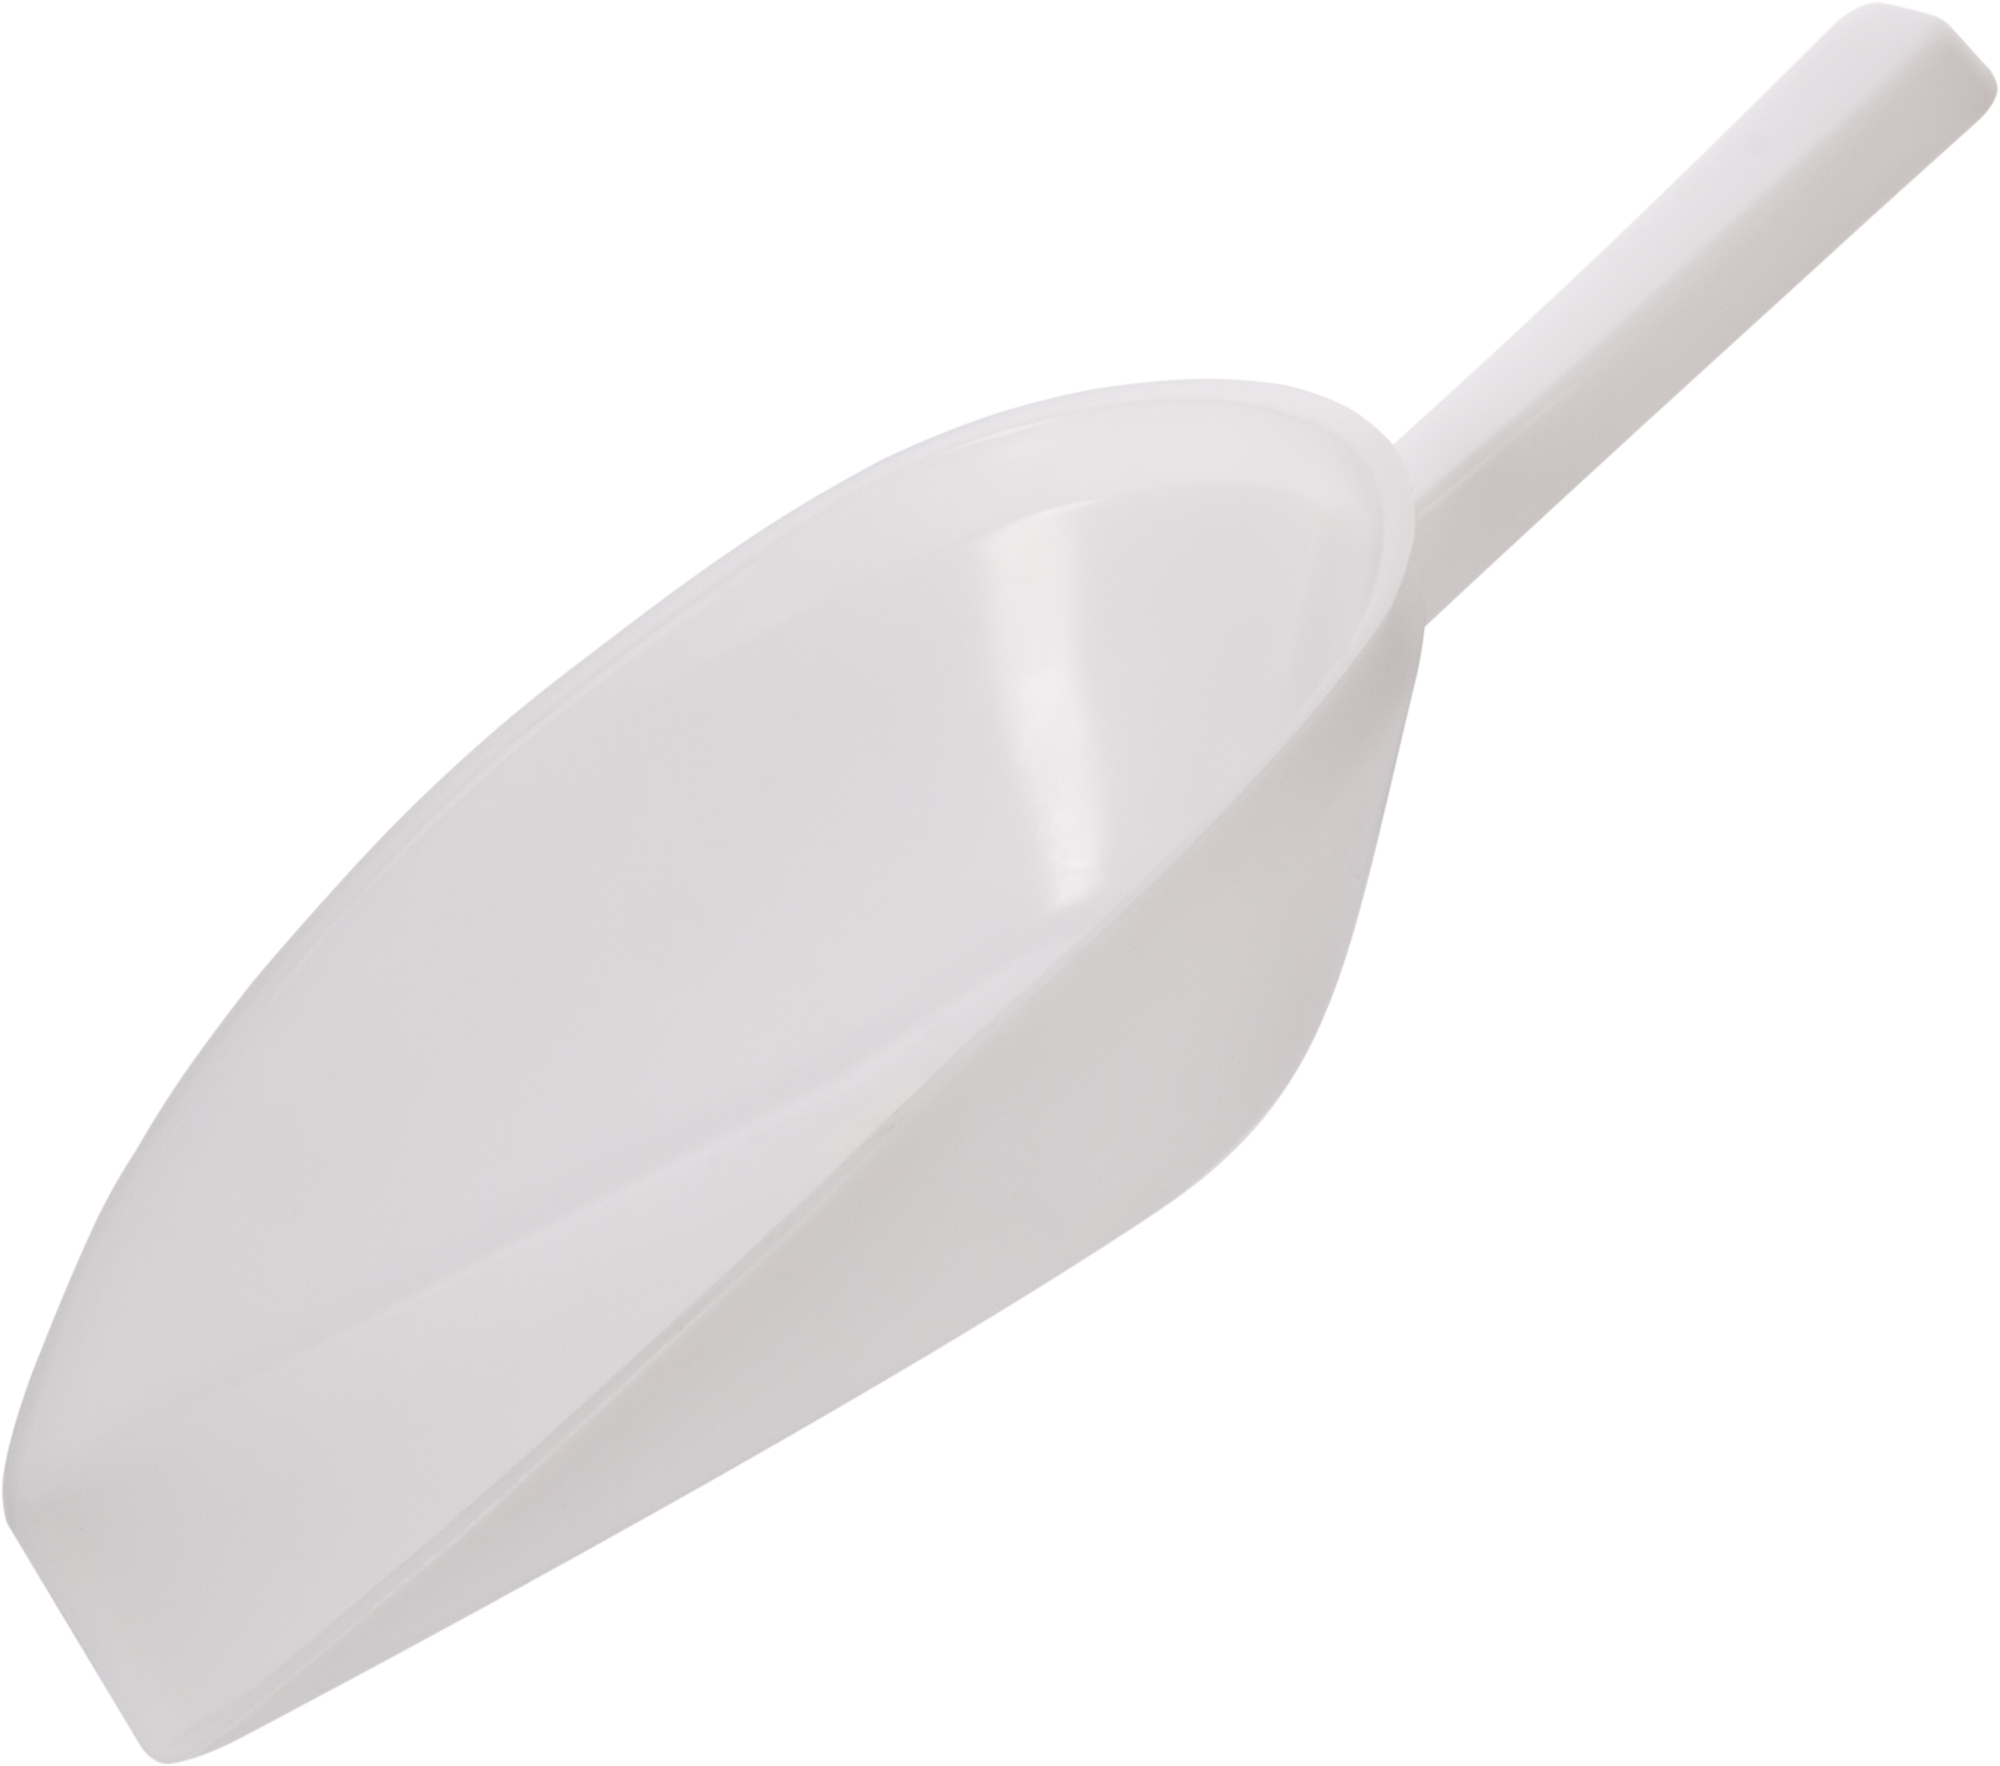 Ice scoop light weigt, small - plastic